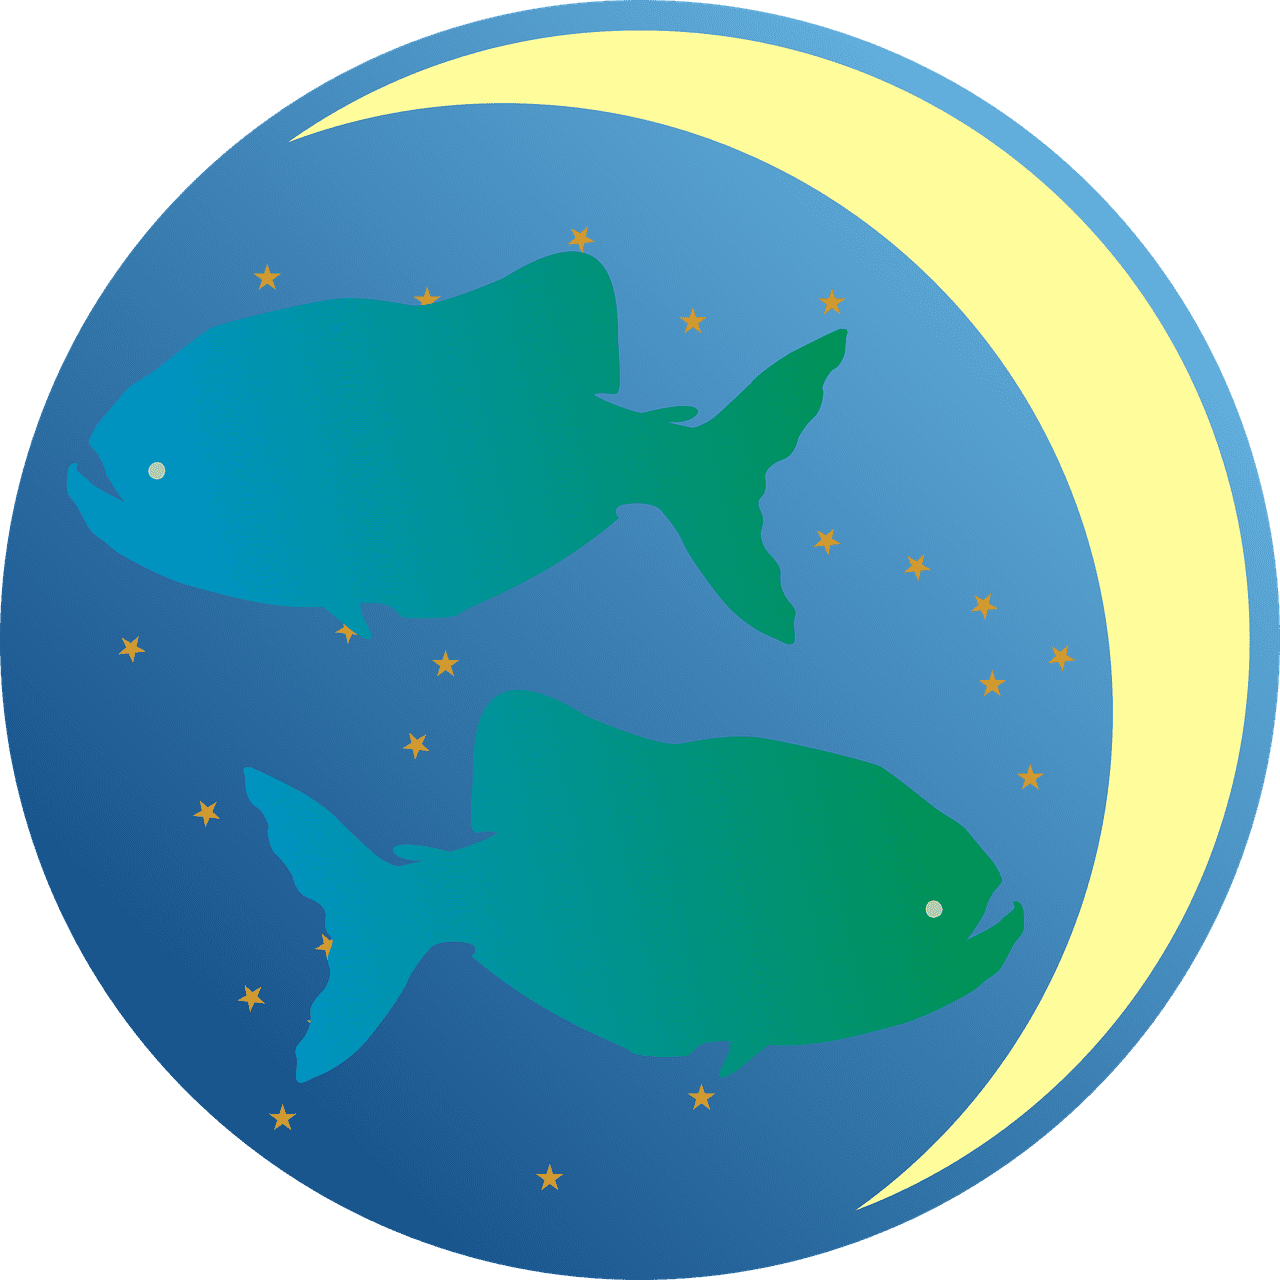 A depiction of the Pisces star sign | Photo: Pixabay/13smok